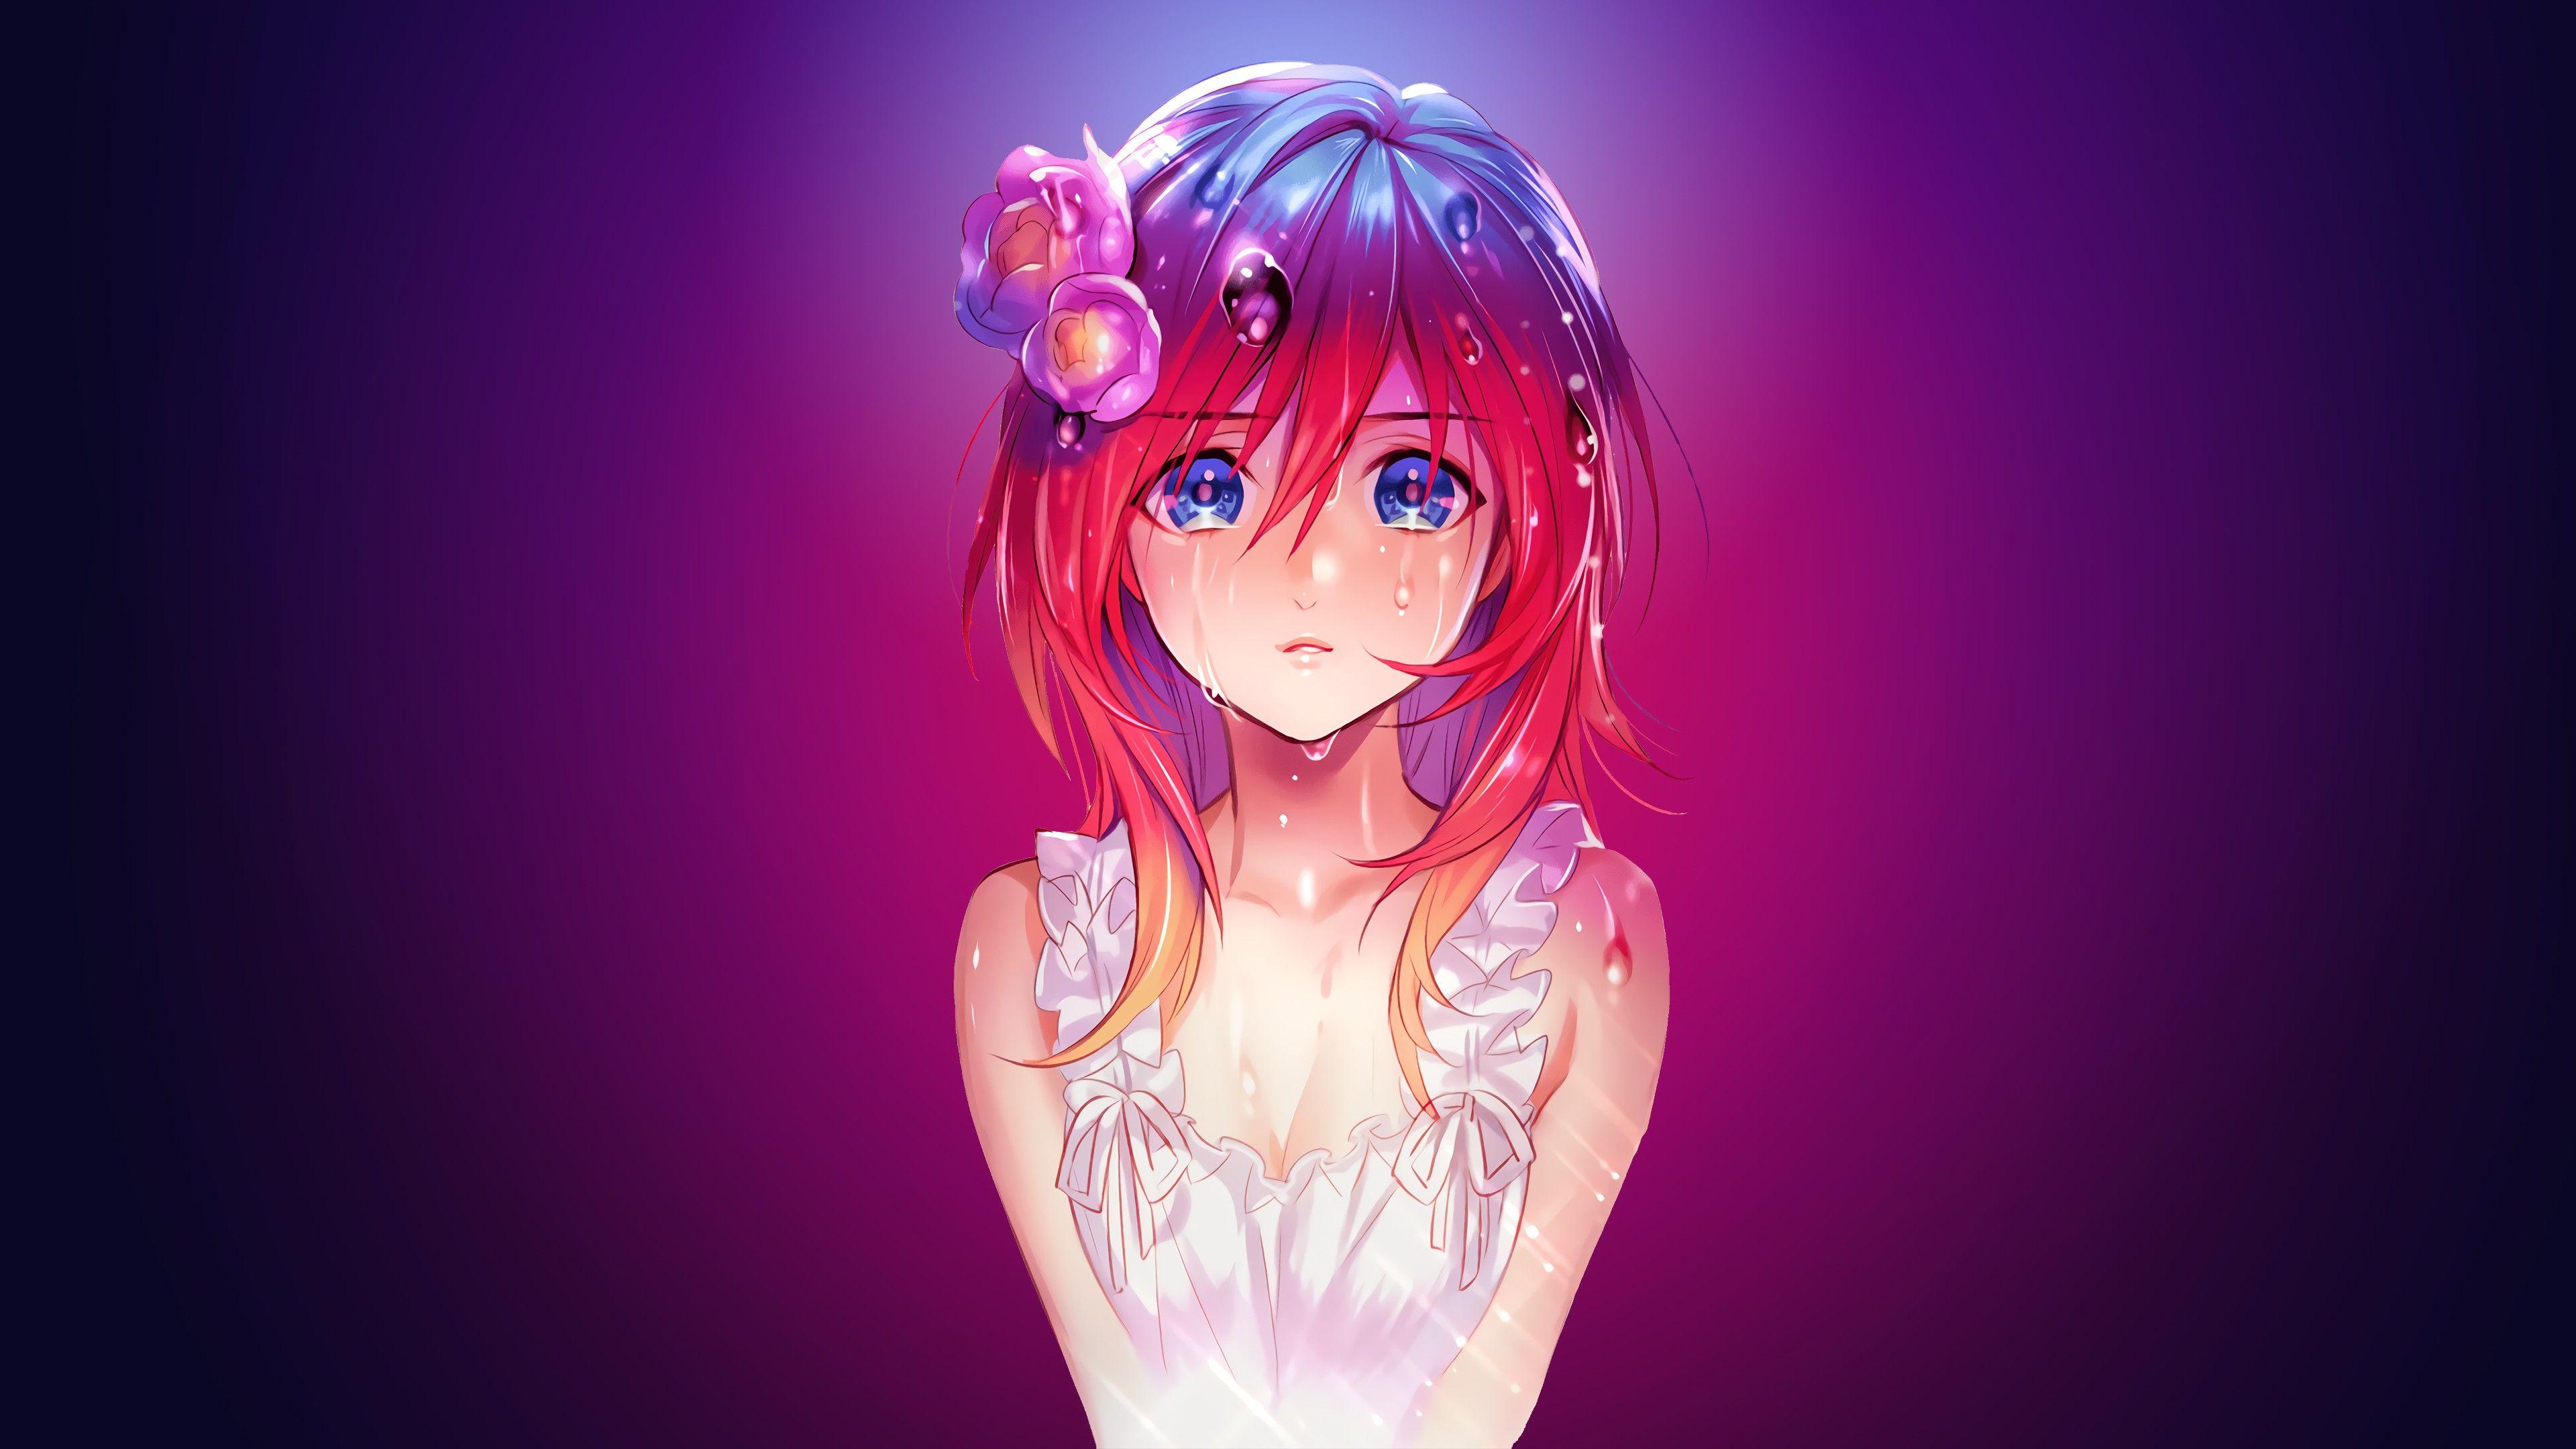 anime girl with blue hair and red eyes